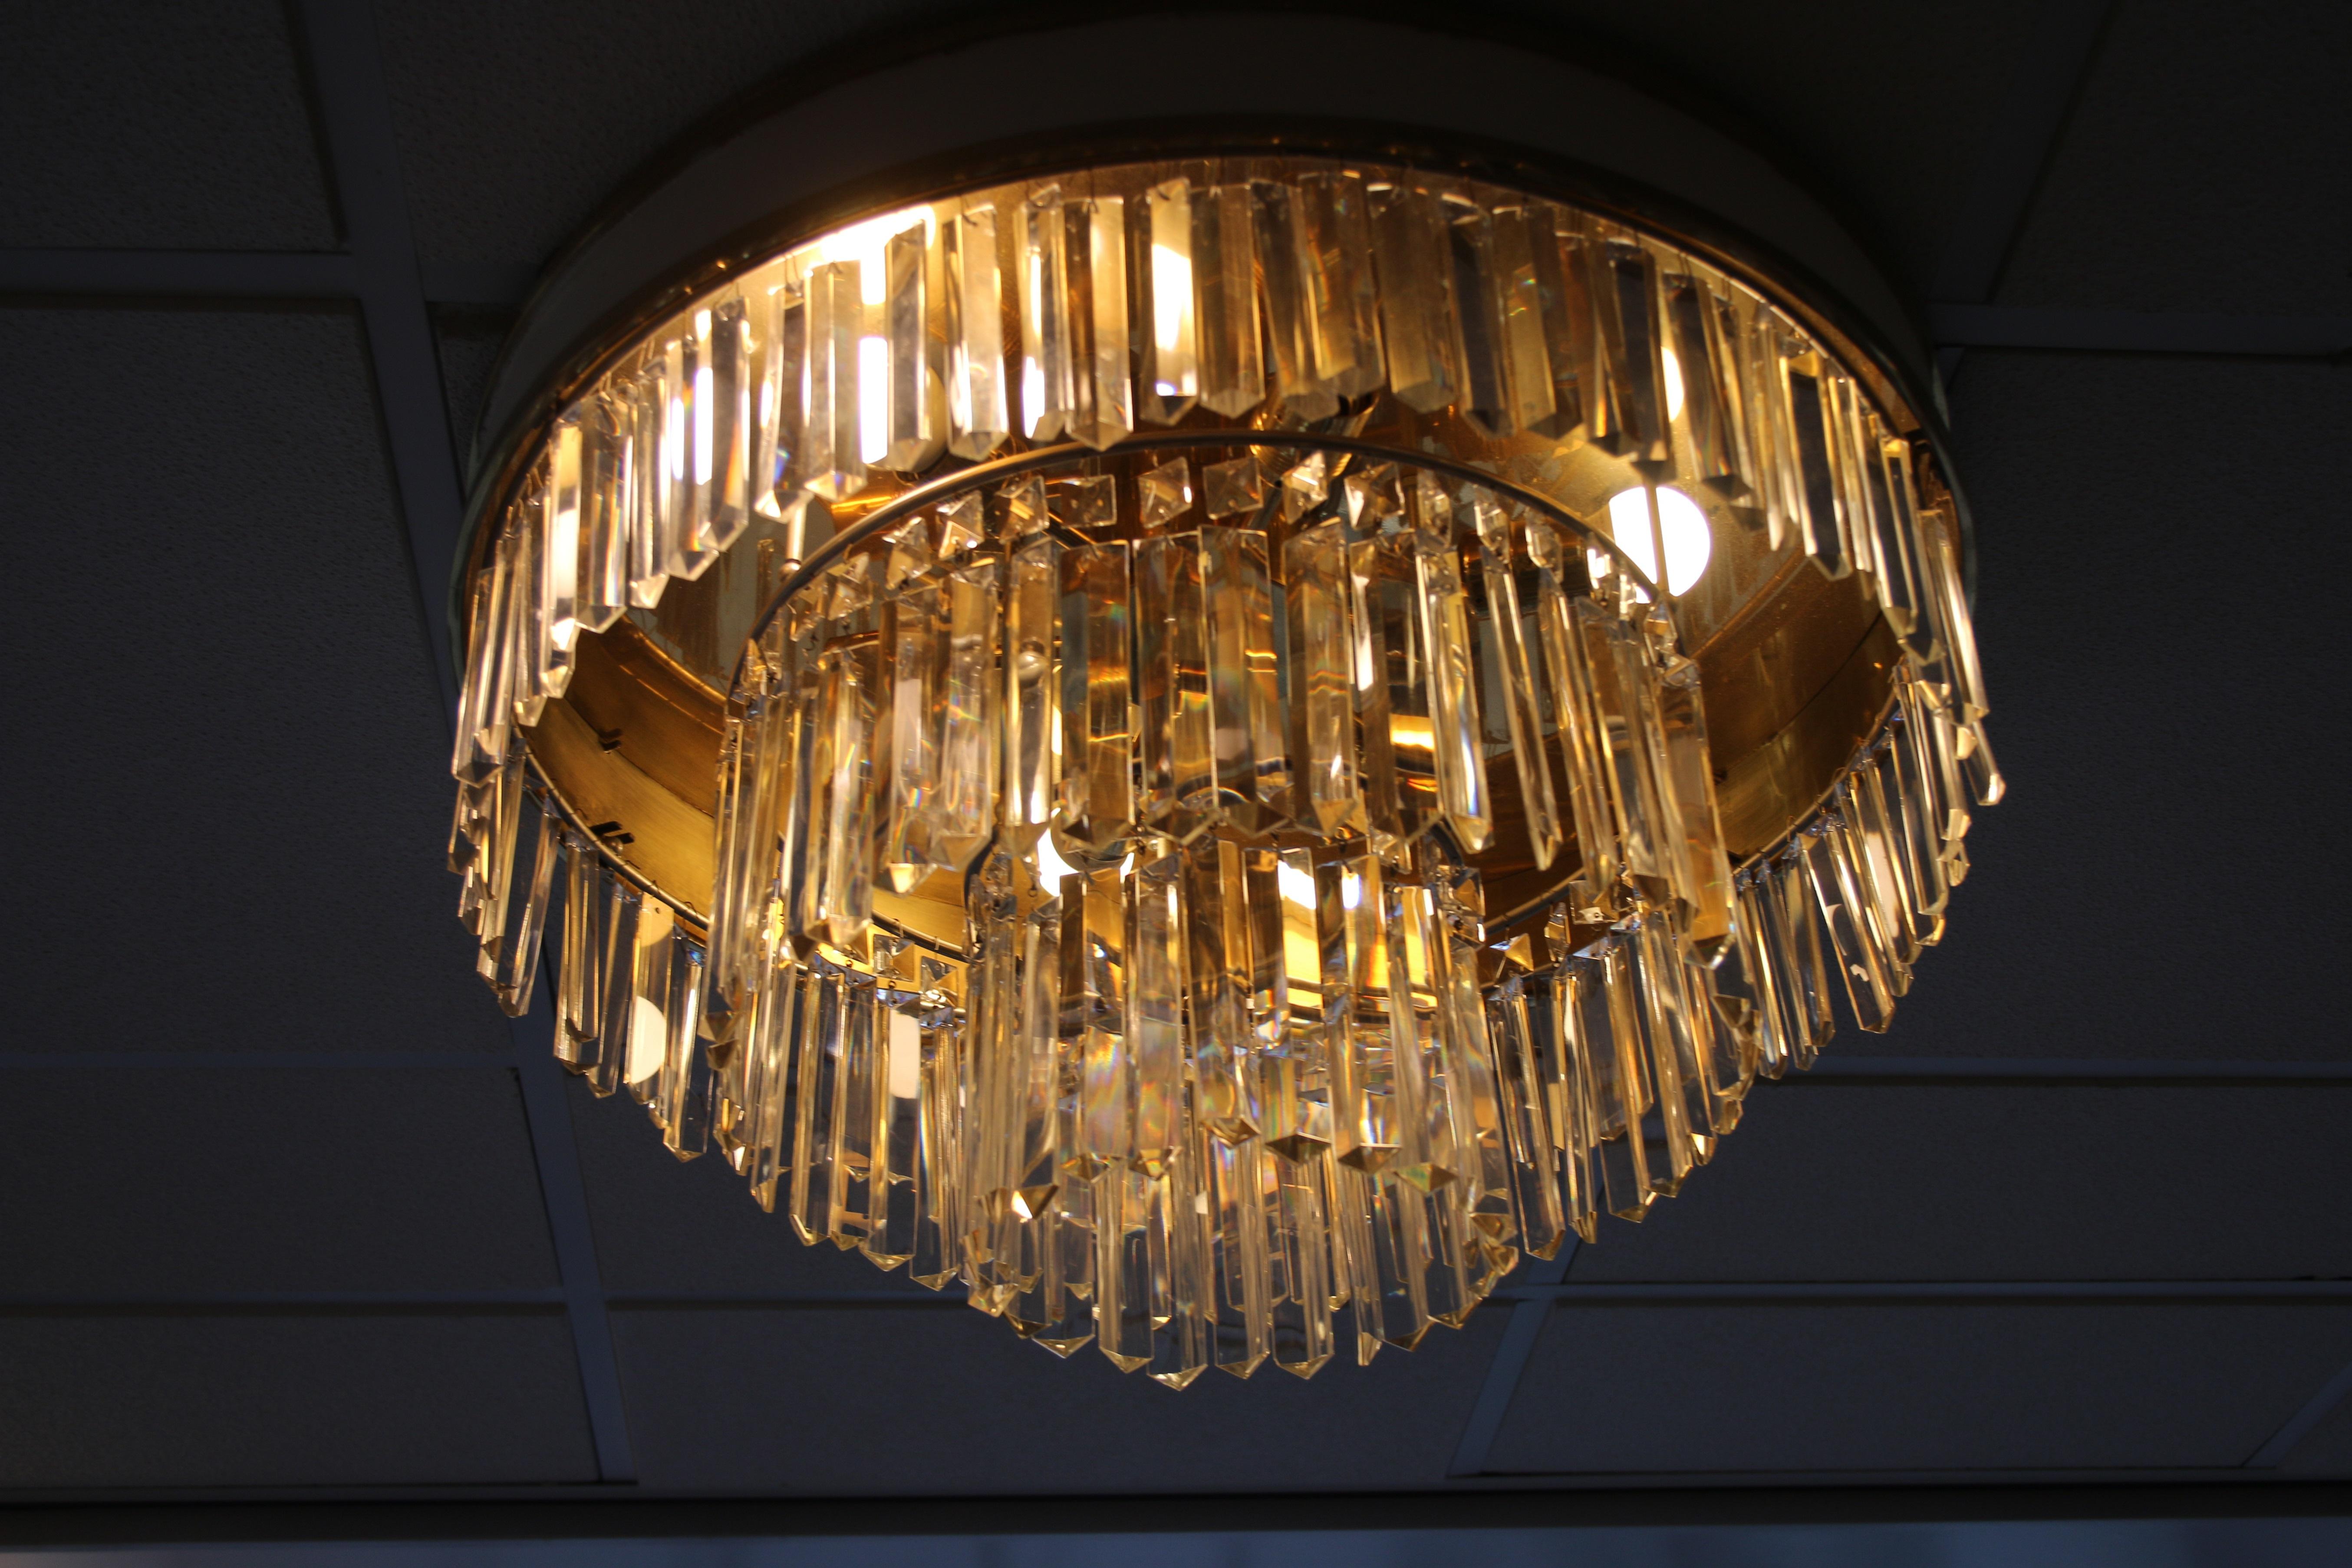 These 2 ceiling lights or Chandeliers are specially made for the owner of the house,
she saw this Model lamp hanging in the National Theater in Düsseldorf.

She was so impressed with this lamp model,
The Original model is:

7 meters high and